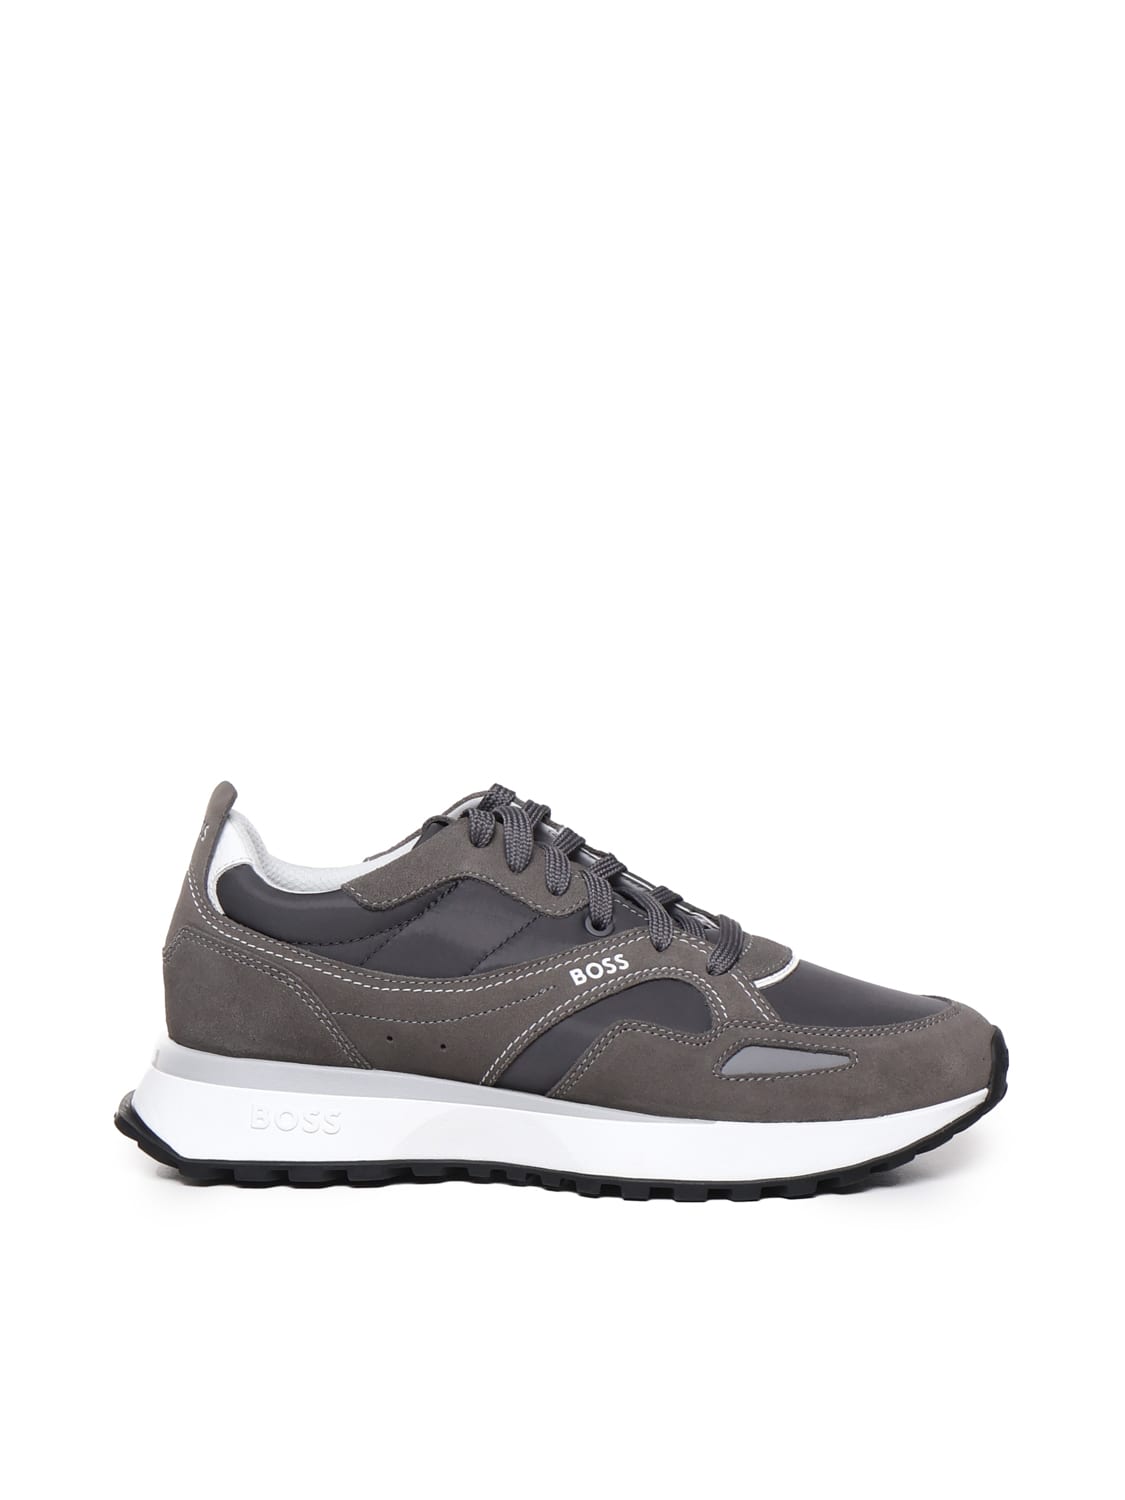 Hugo Boss Mixed Materials Sneakers With Suede And Branded Trim In Grey